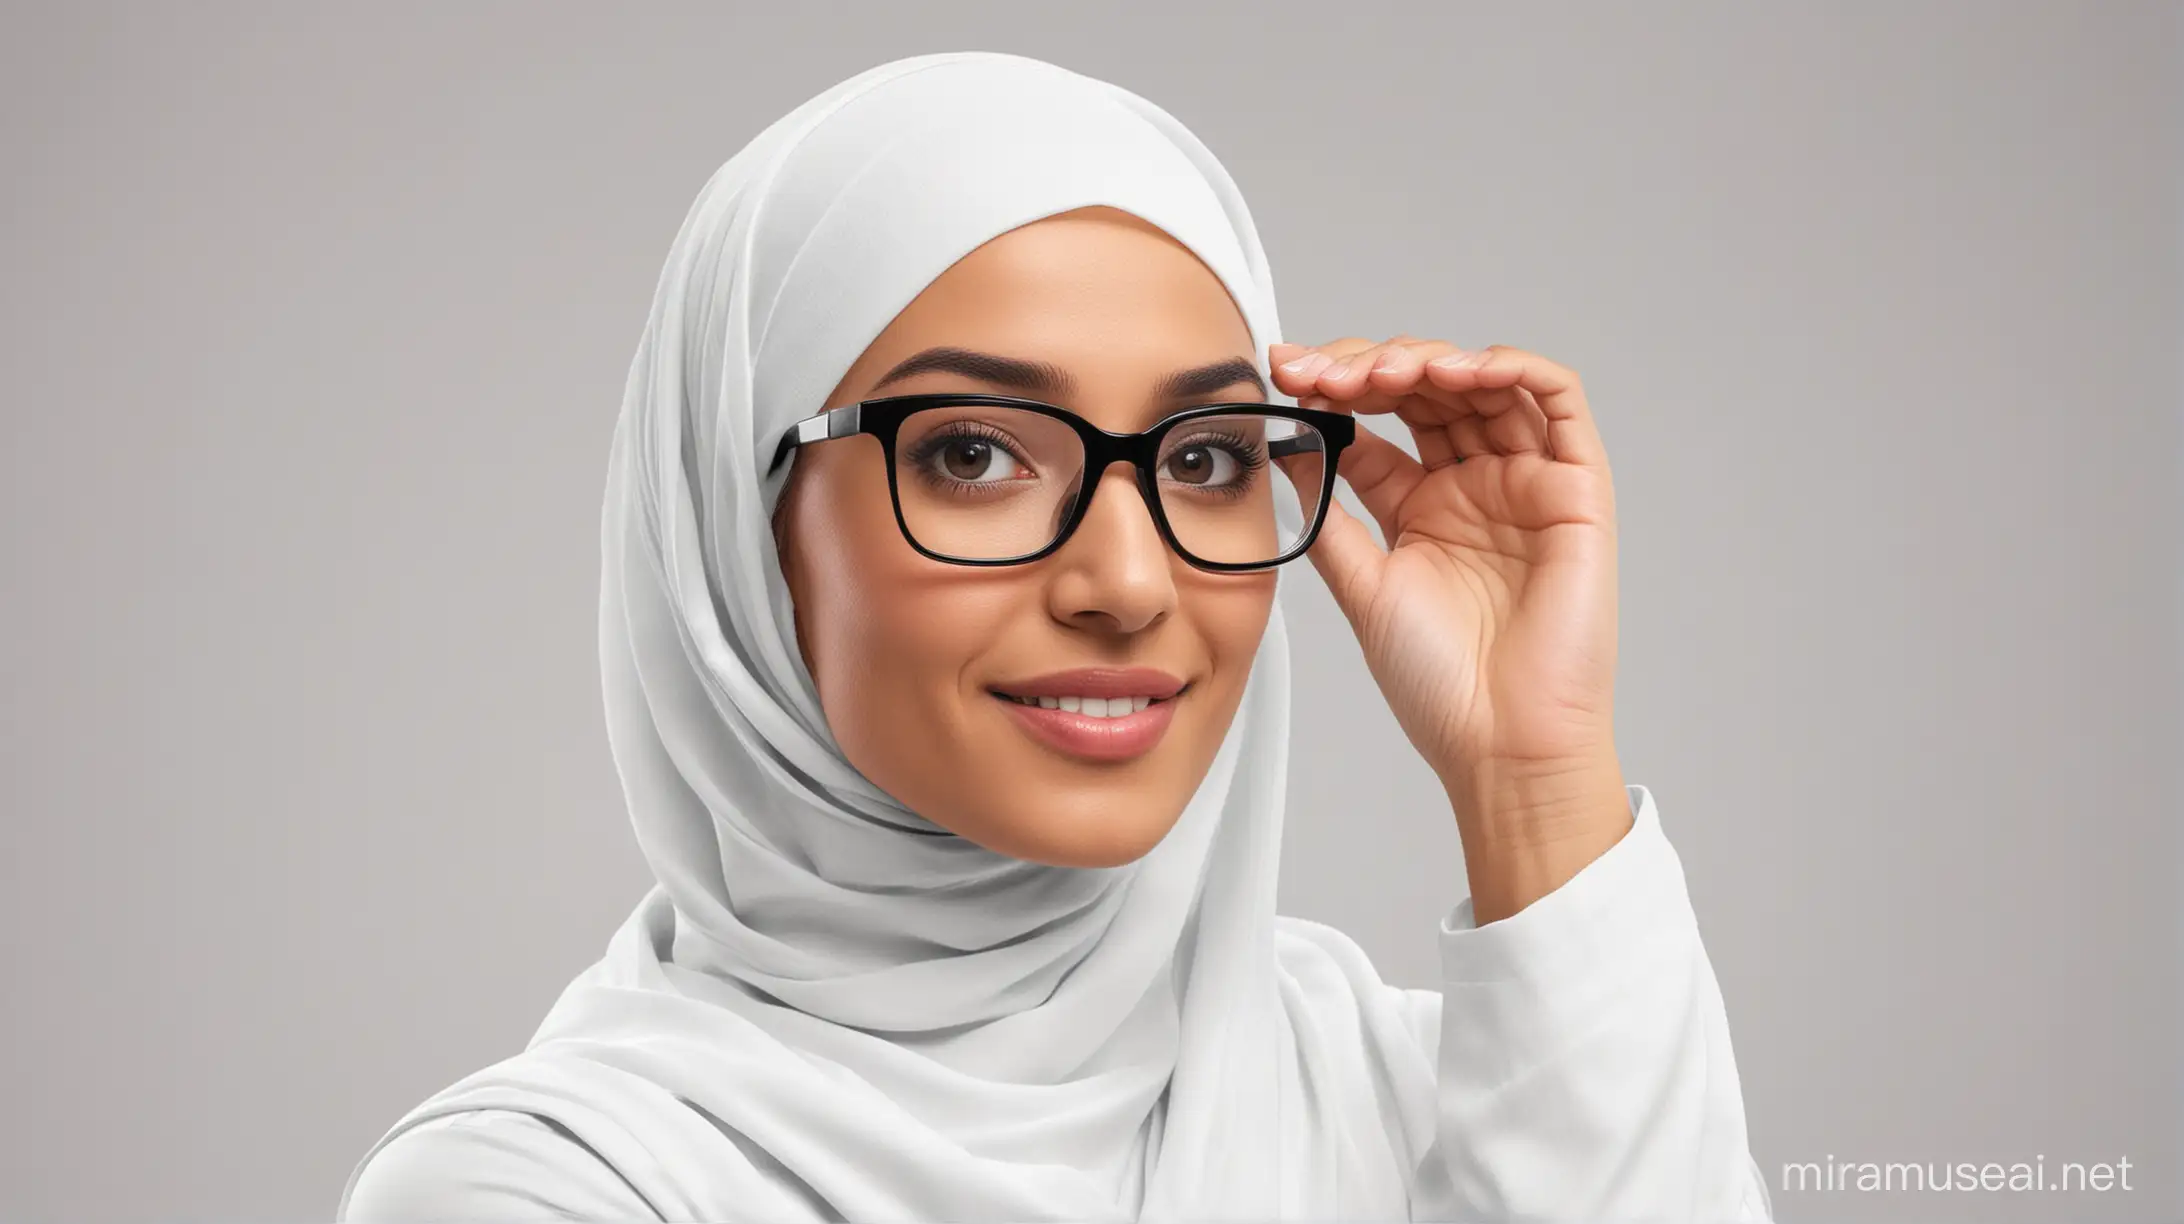 Muslim Chemistry Teacher Wearing 3D Hijab and Glasses on White Background